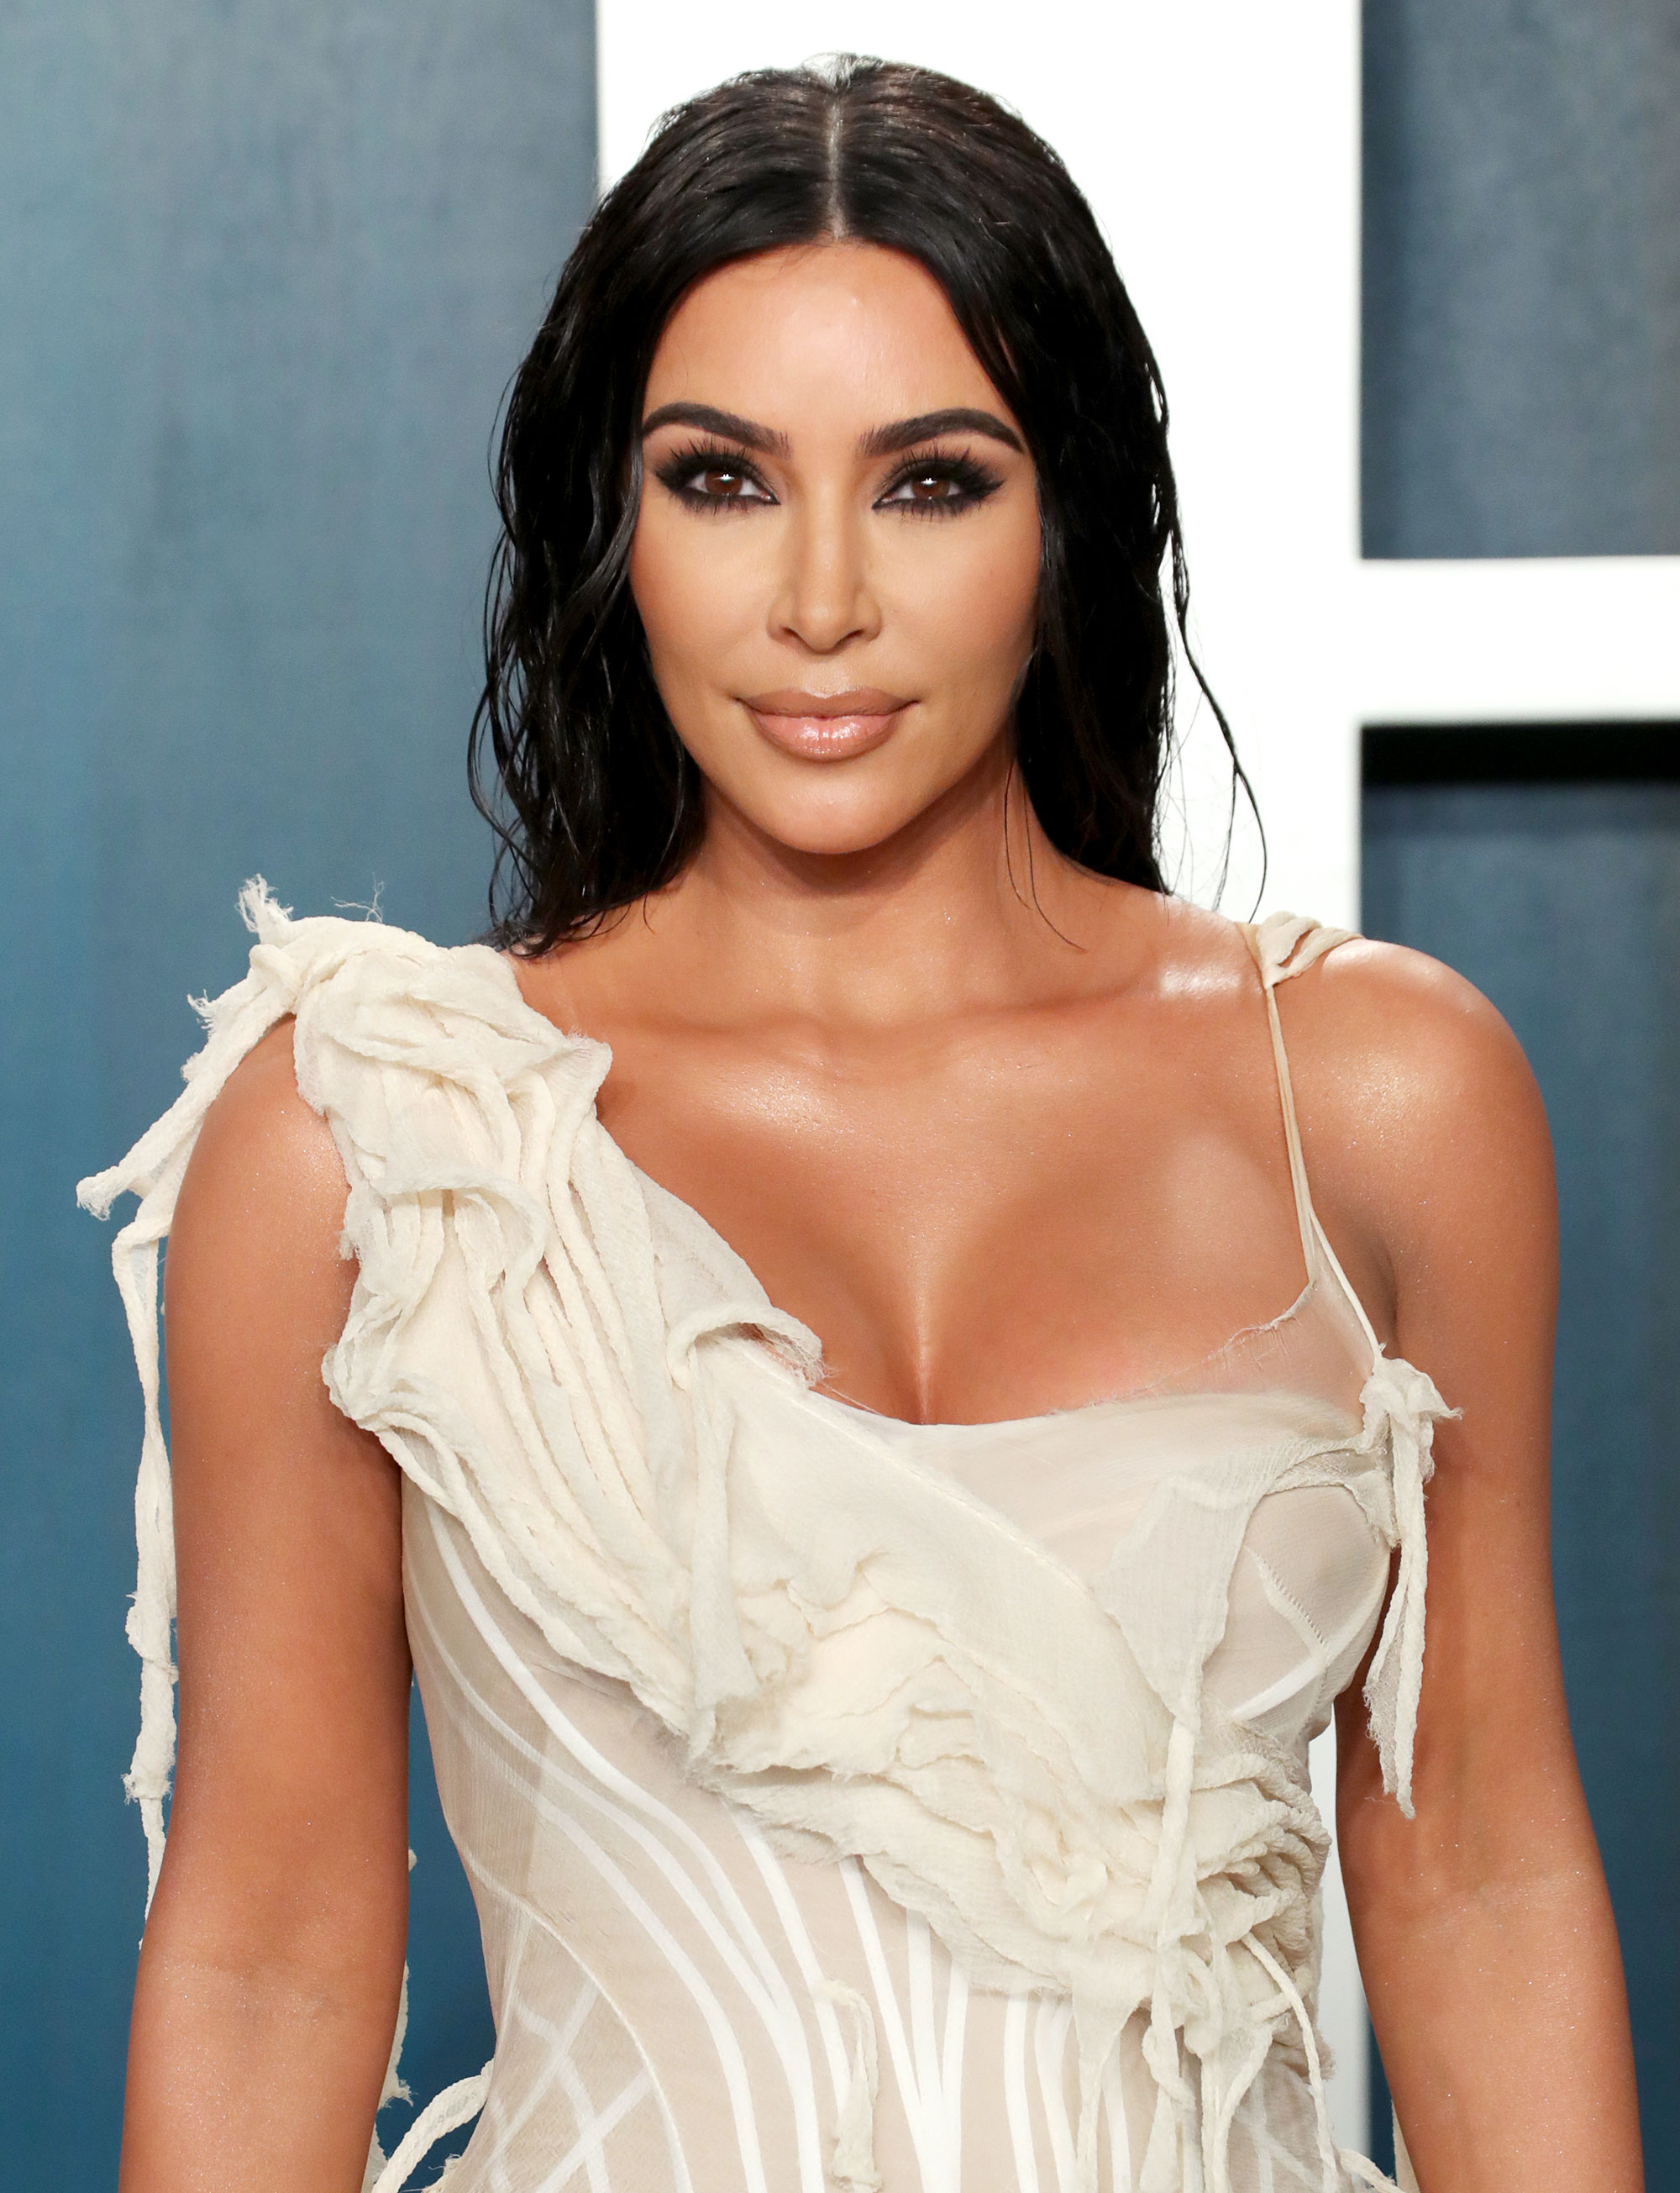 Beyond Meat Adds Kim Kardashian to Its Roster of Celebs, beyond meat